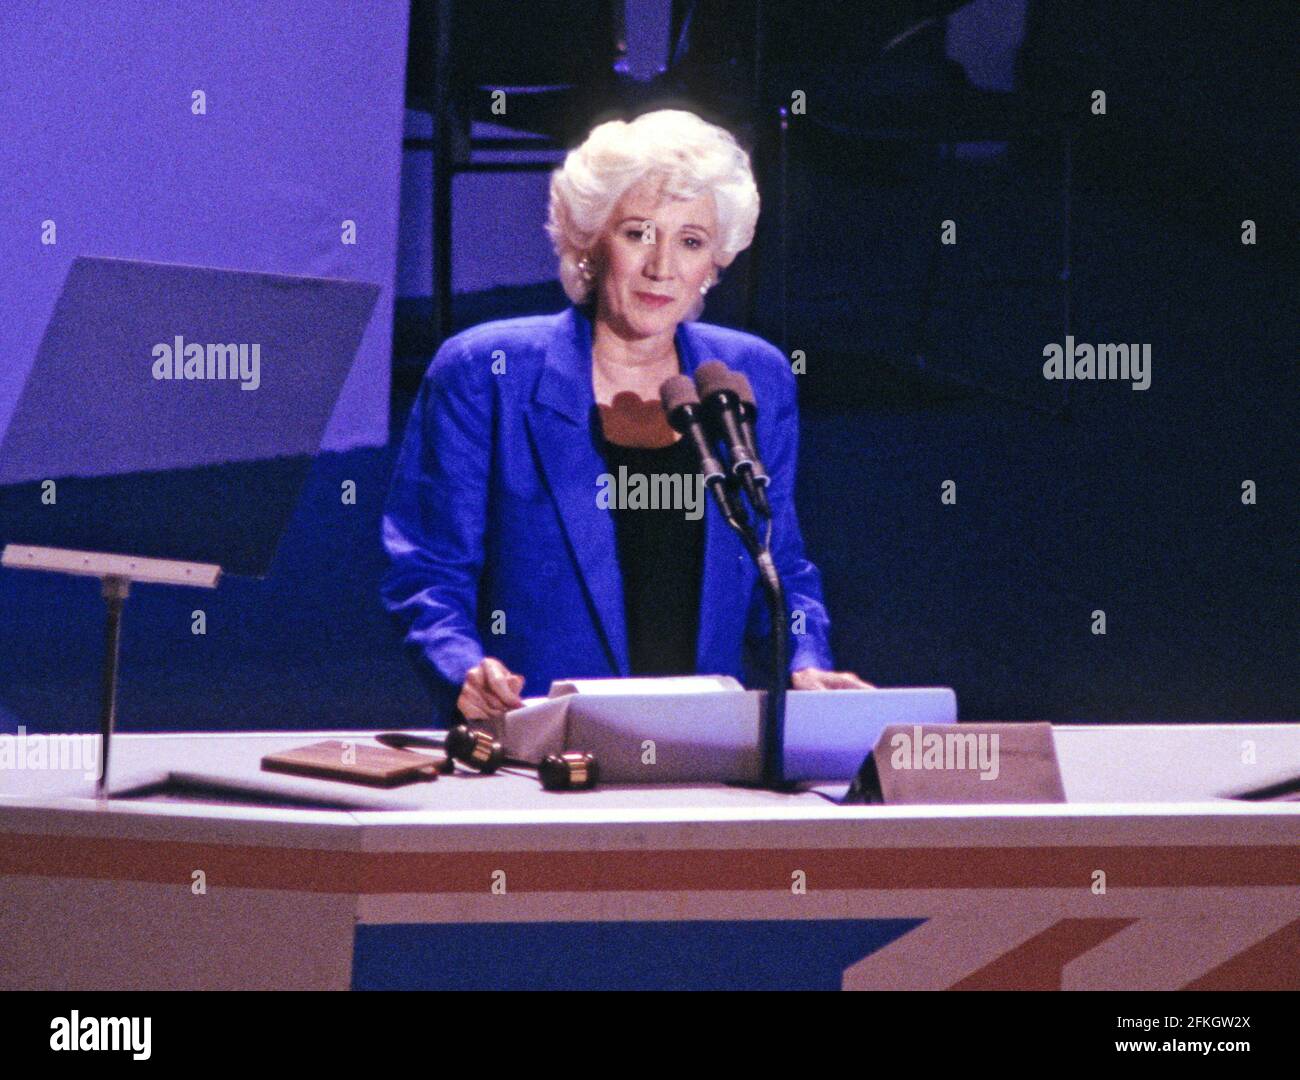 Oscar Award-winning actress Olympia Dukakis, makes remarks supporting her cousin, Governor Michael Dukakis (Democrat of Massachusetts), the 1988 Democratic Party nominee for President of the United States, at the 1988 Democratic National Convention in the Omni Coliseum in Atlanta, Georgia on July 21, 1988. Credit: Arnie Sachs/CNP/Sipa USA Credit: Sipa USA/Alamy Live News Stock Photo